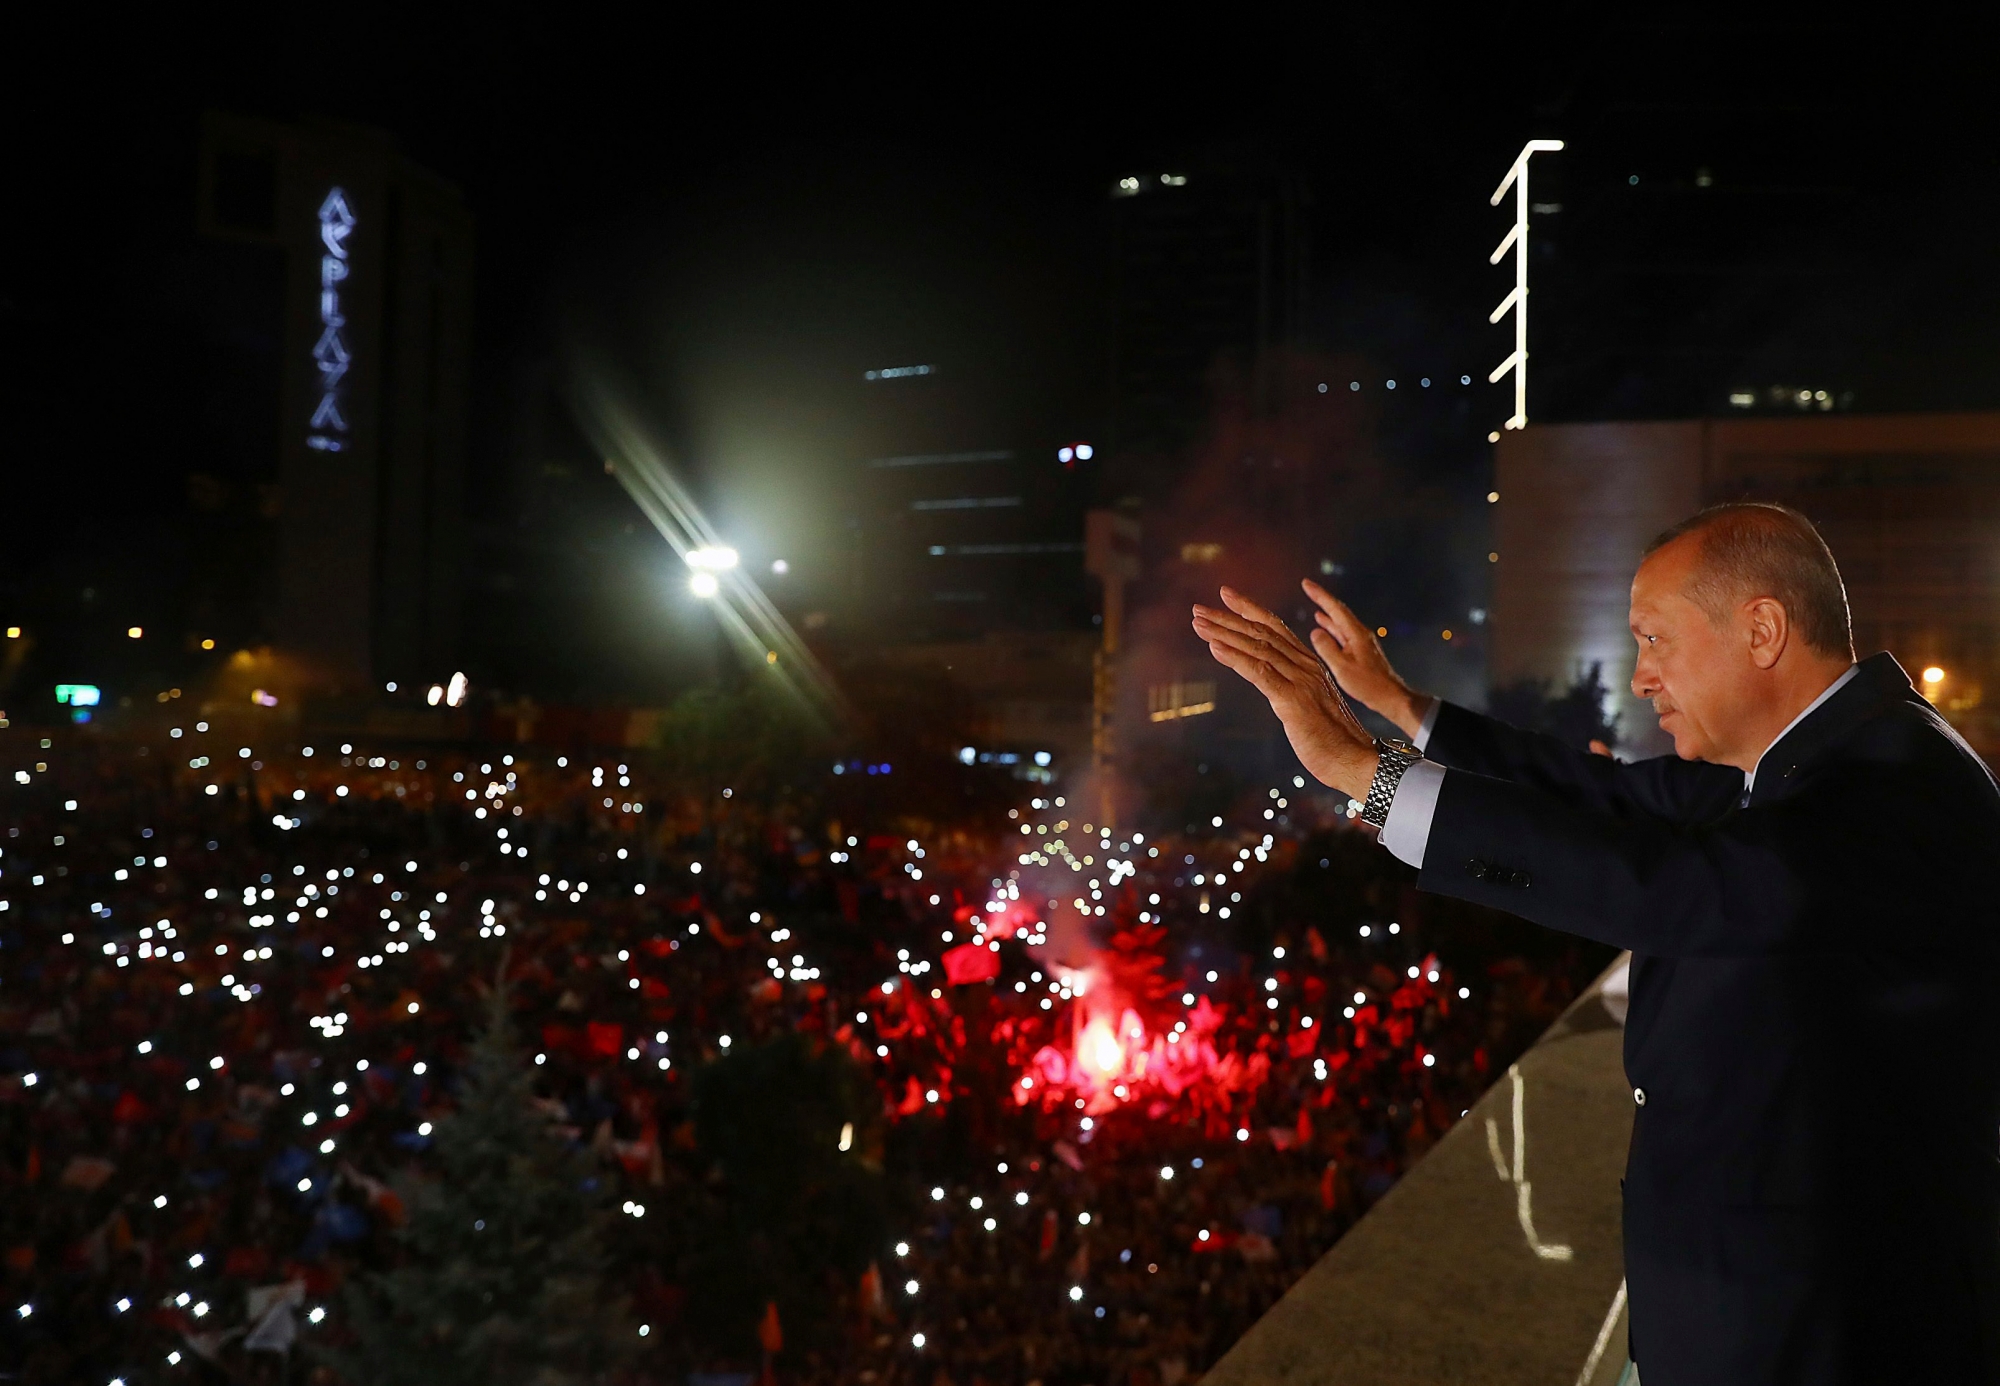 Turkey's President Recep Tayyip Erdogan, waves to supporters of his ruling Justice and Development Party (AKP) in Ankara, Turkey, early Monday, June 25, 2018. Erdogan won Turkey's landmark election Sunday, the country's electoral commission said, ushering in a new system granting the president sweeping new powers which critics say will cement what they call a one-man rule (Presidency Press Service via AP, Pool) Turkey Elections